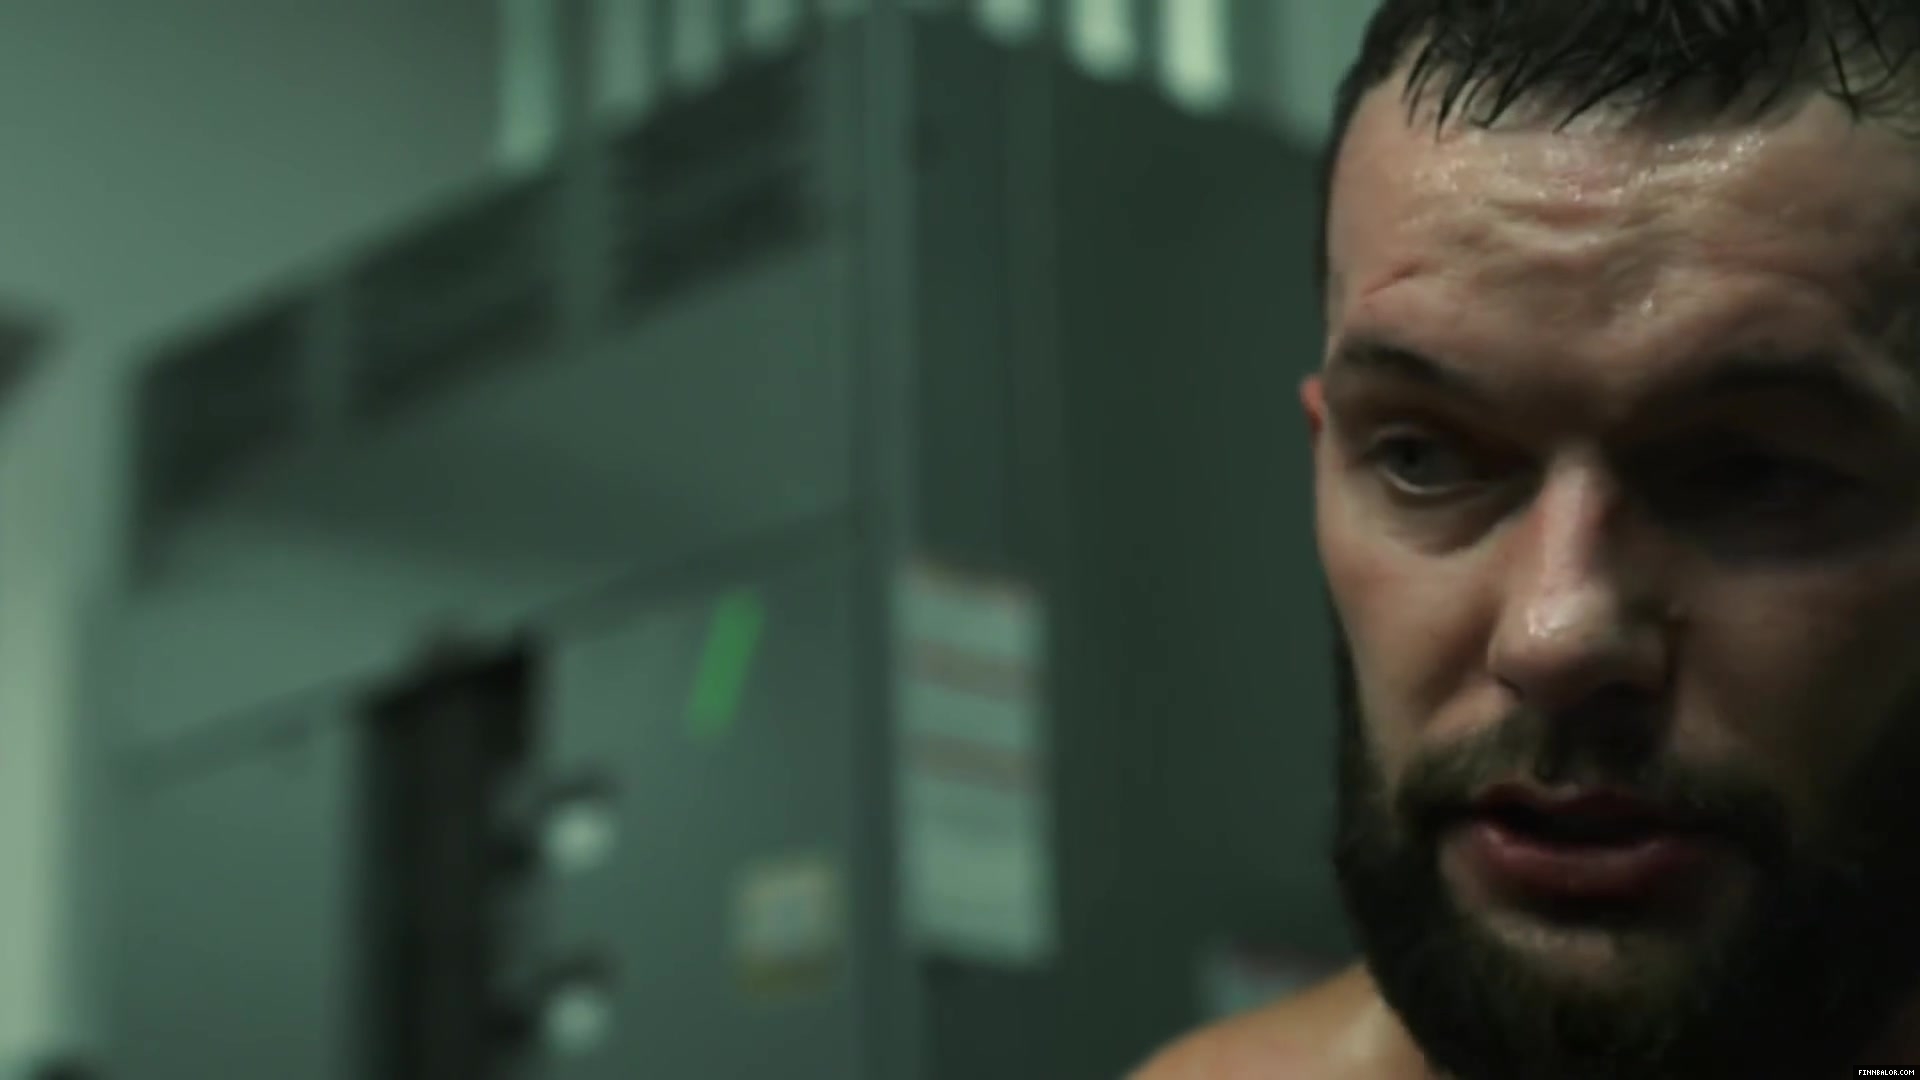 Finn_Balor___The_Rising_of_the_Prince_in_NXT_298.jpg